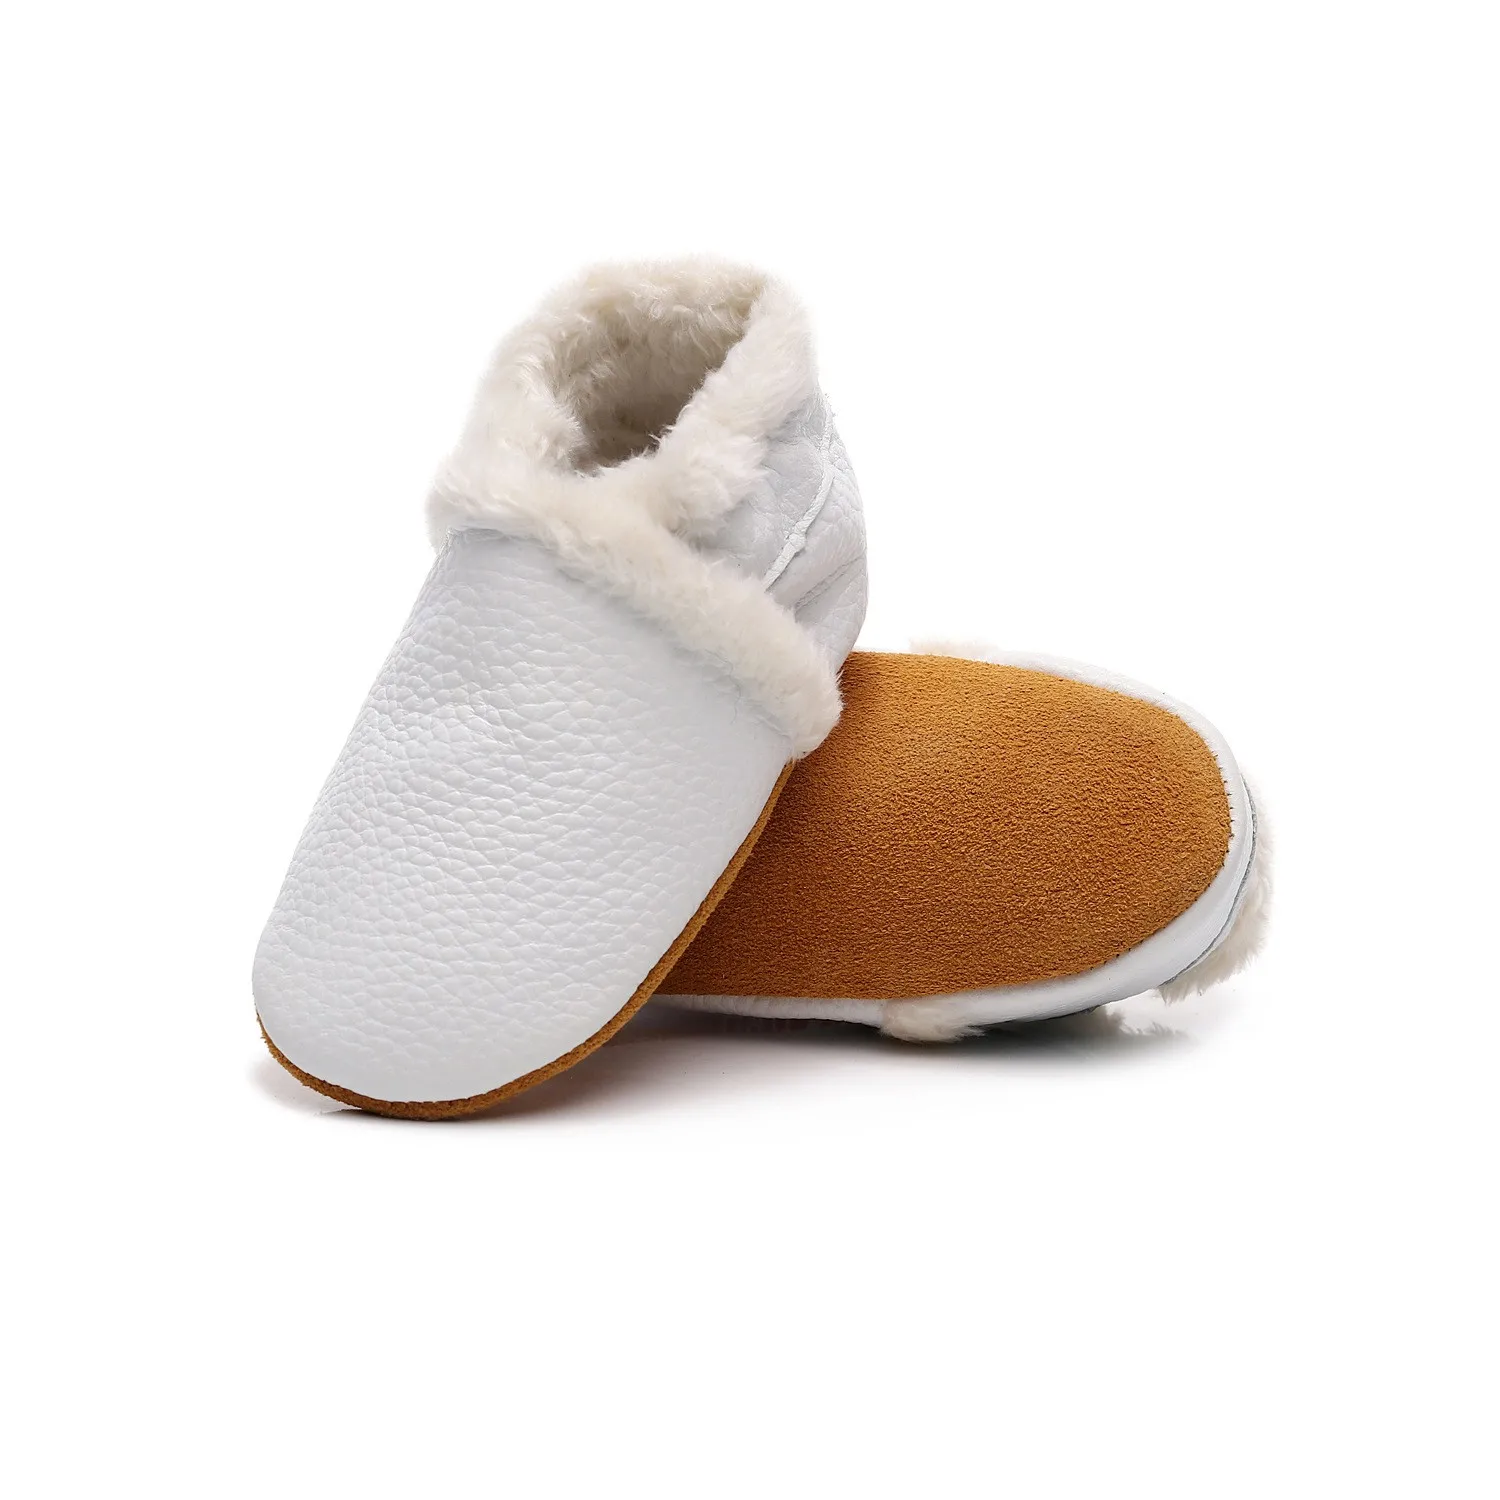 winter baby shoes 31